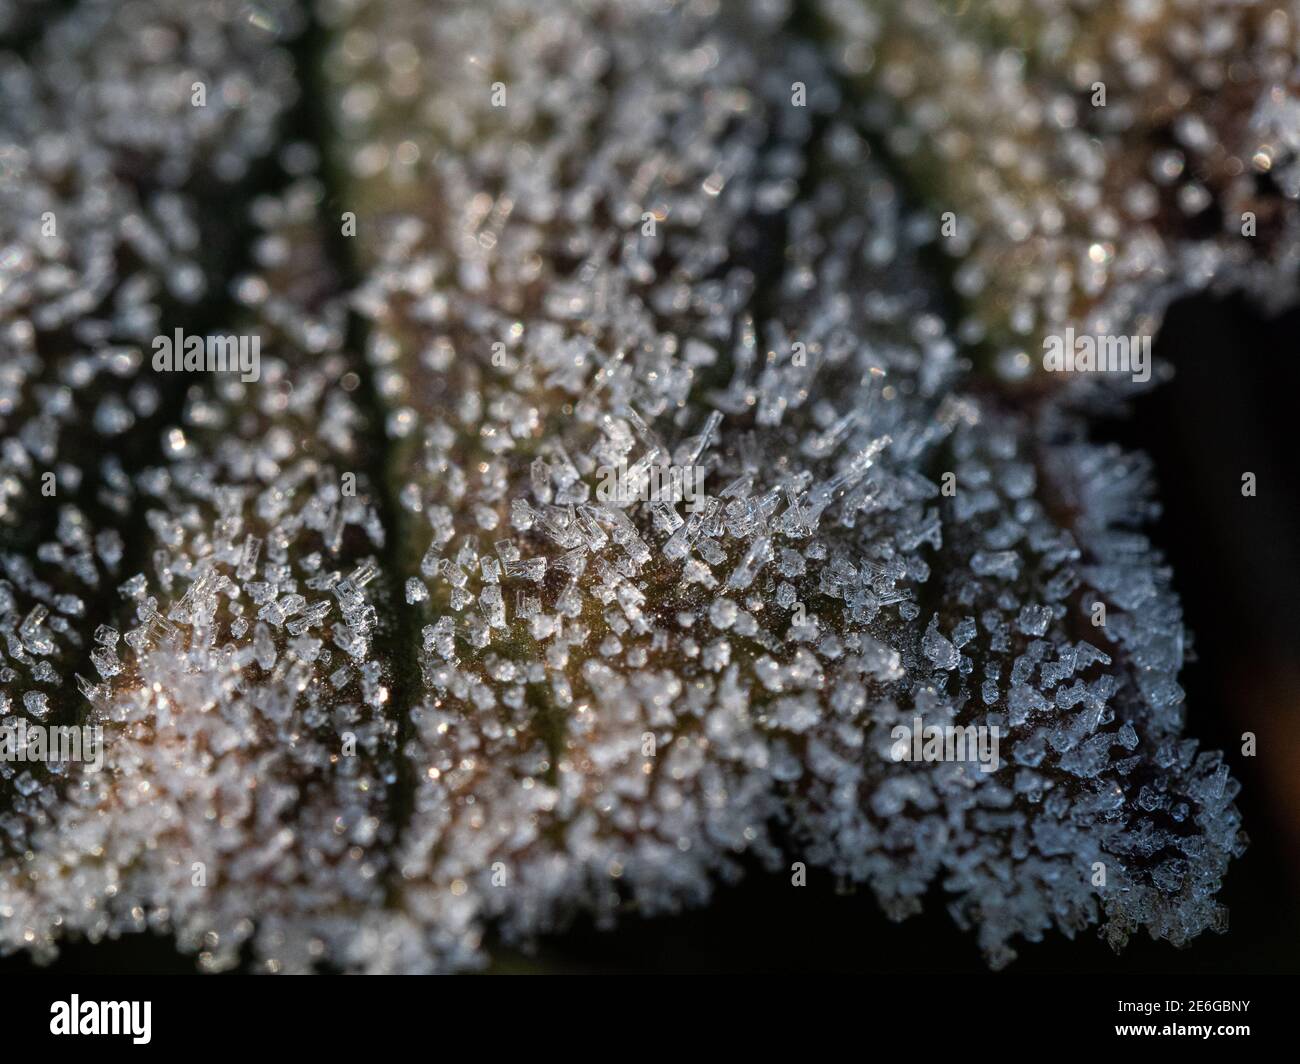 a close up of a brown leave covered in sugar like white ice crystals Stock Photo